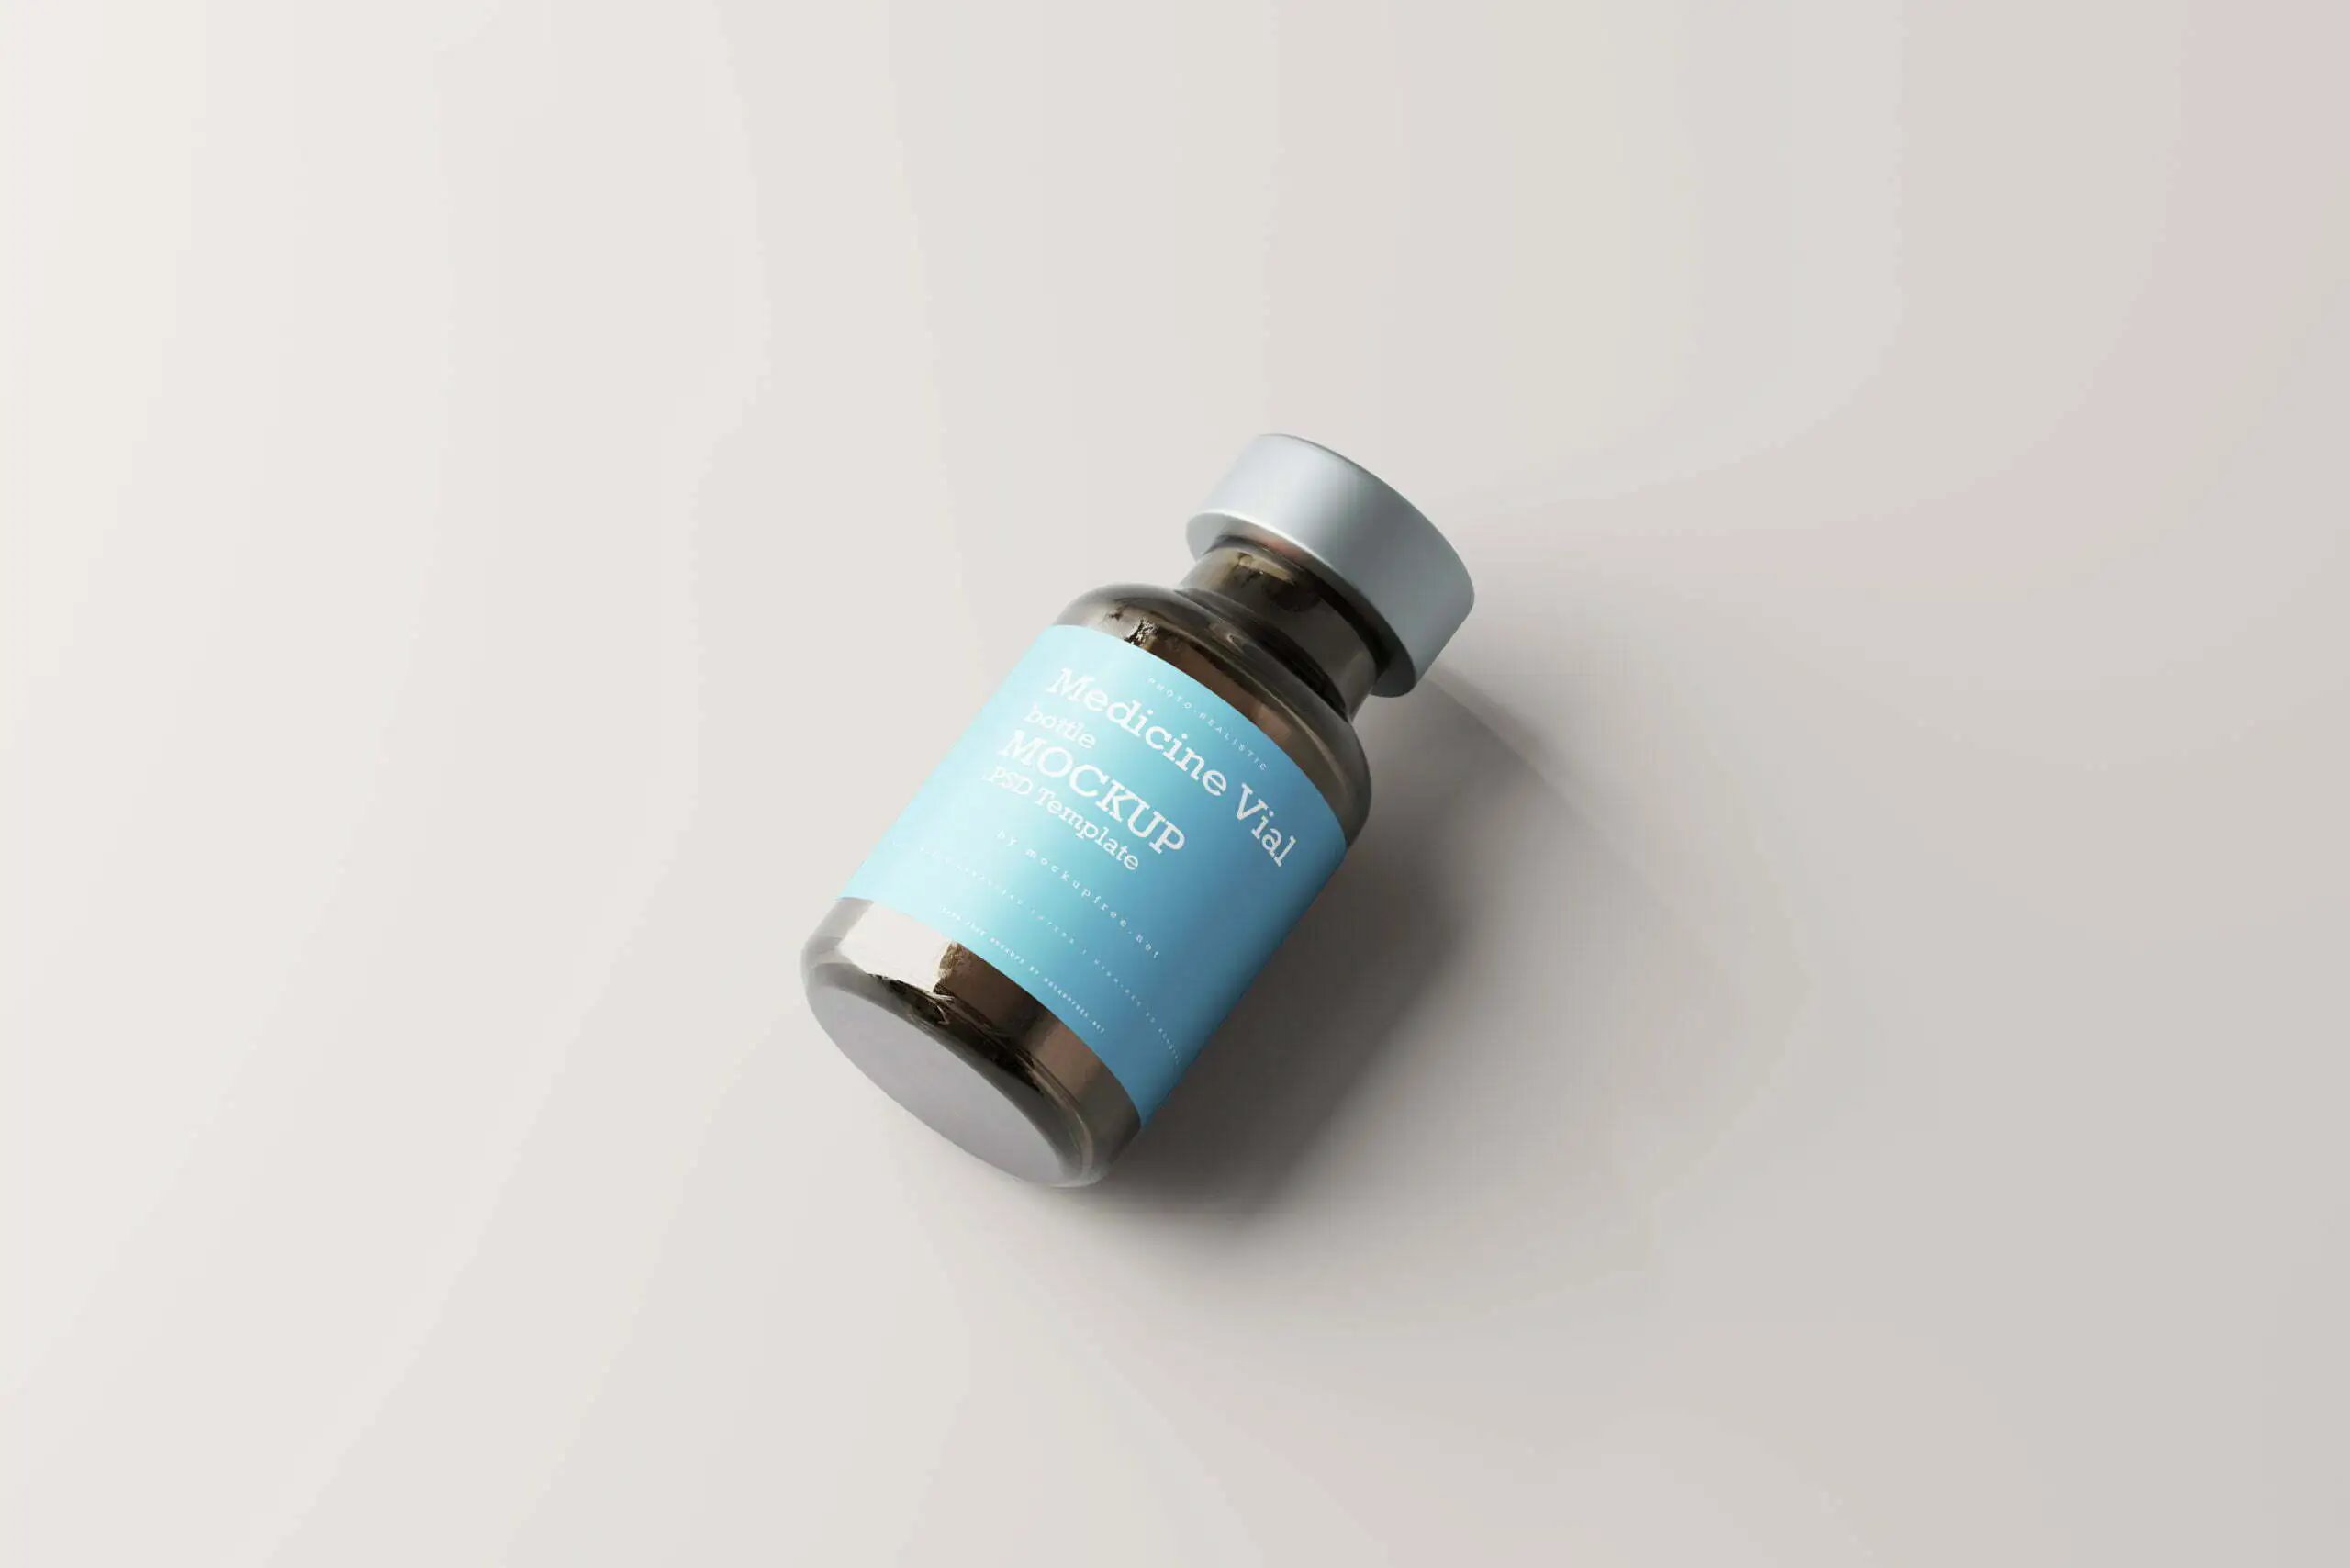 3 Vaccine Vial Bottle Mockups in Different Sights FREE PSD